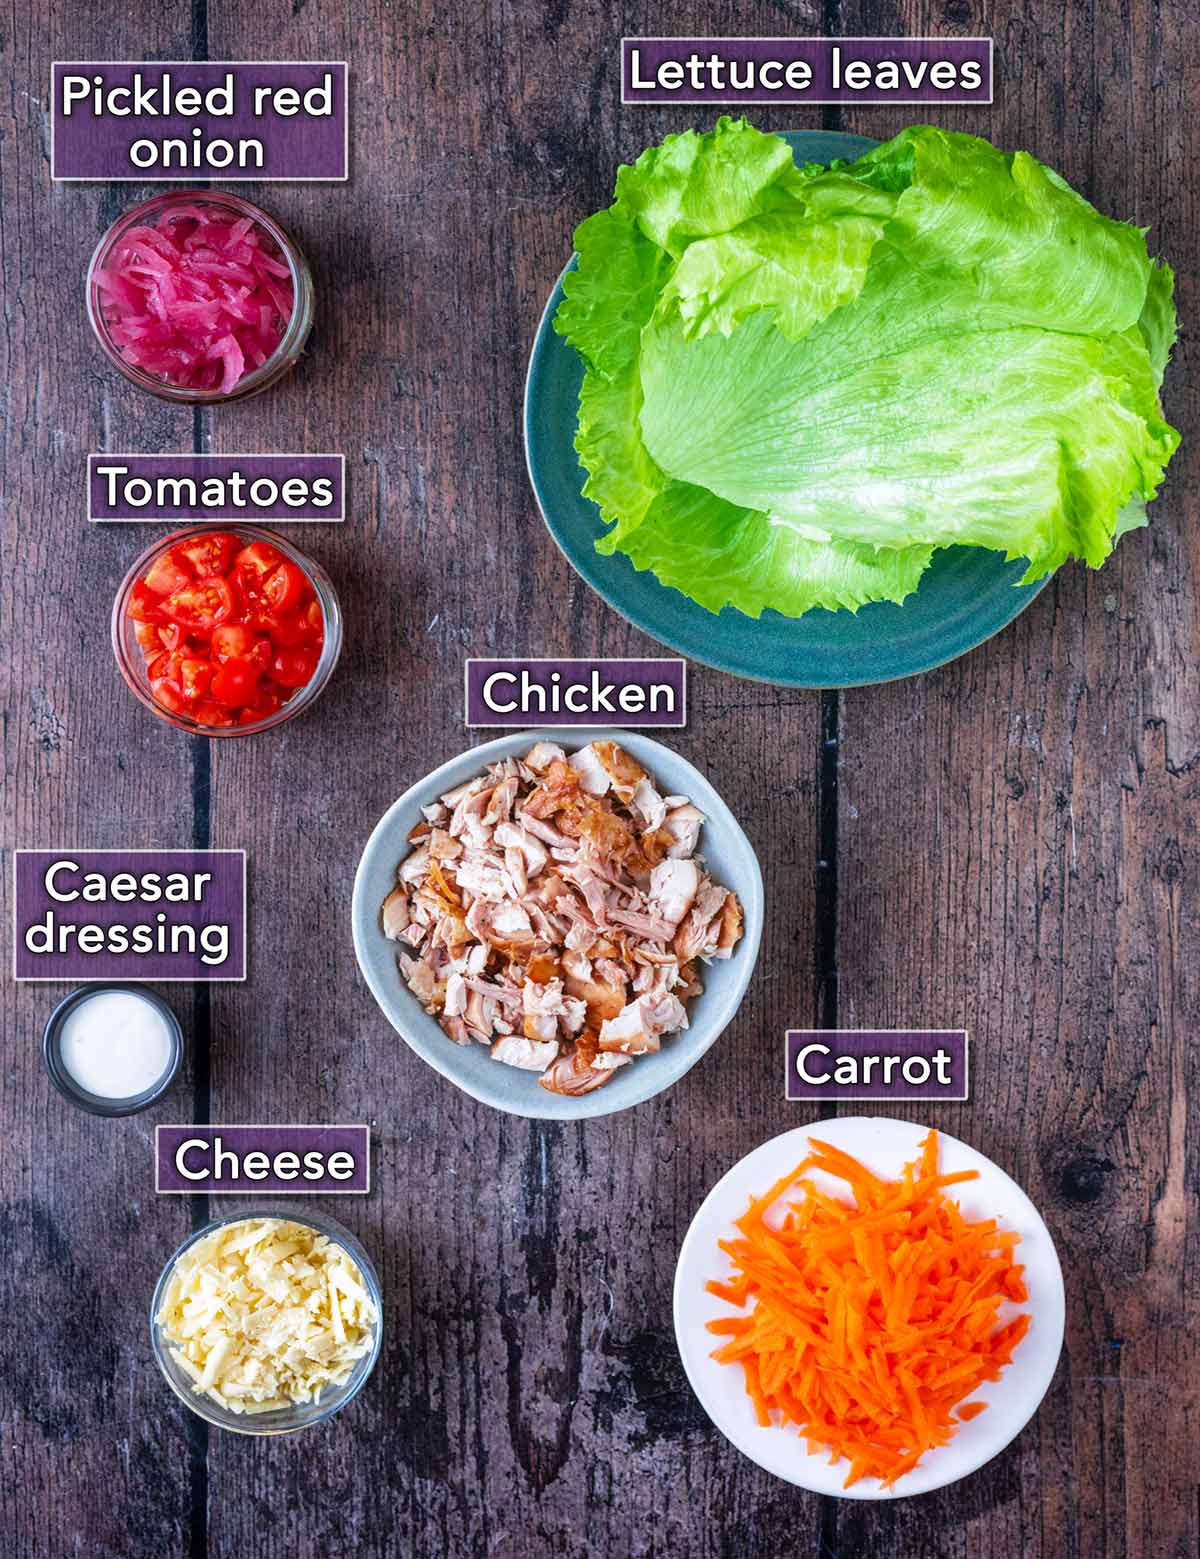 All the ingredients needed to make this recipe, each with a text overlay label.